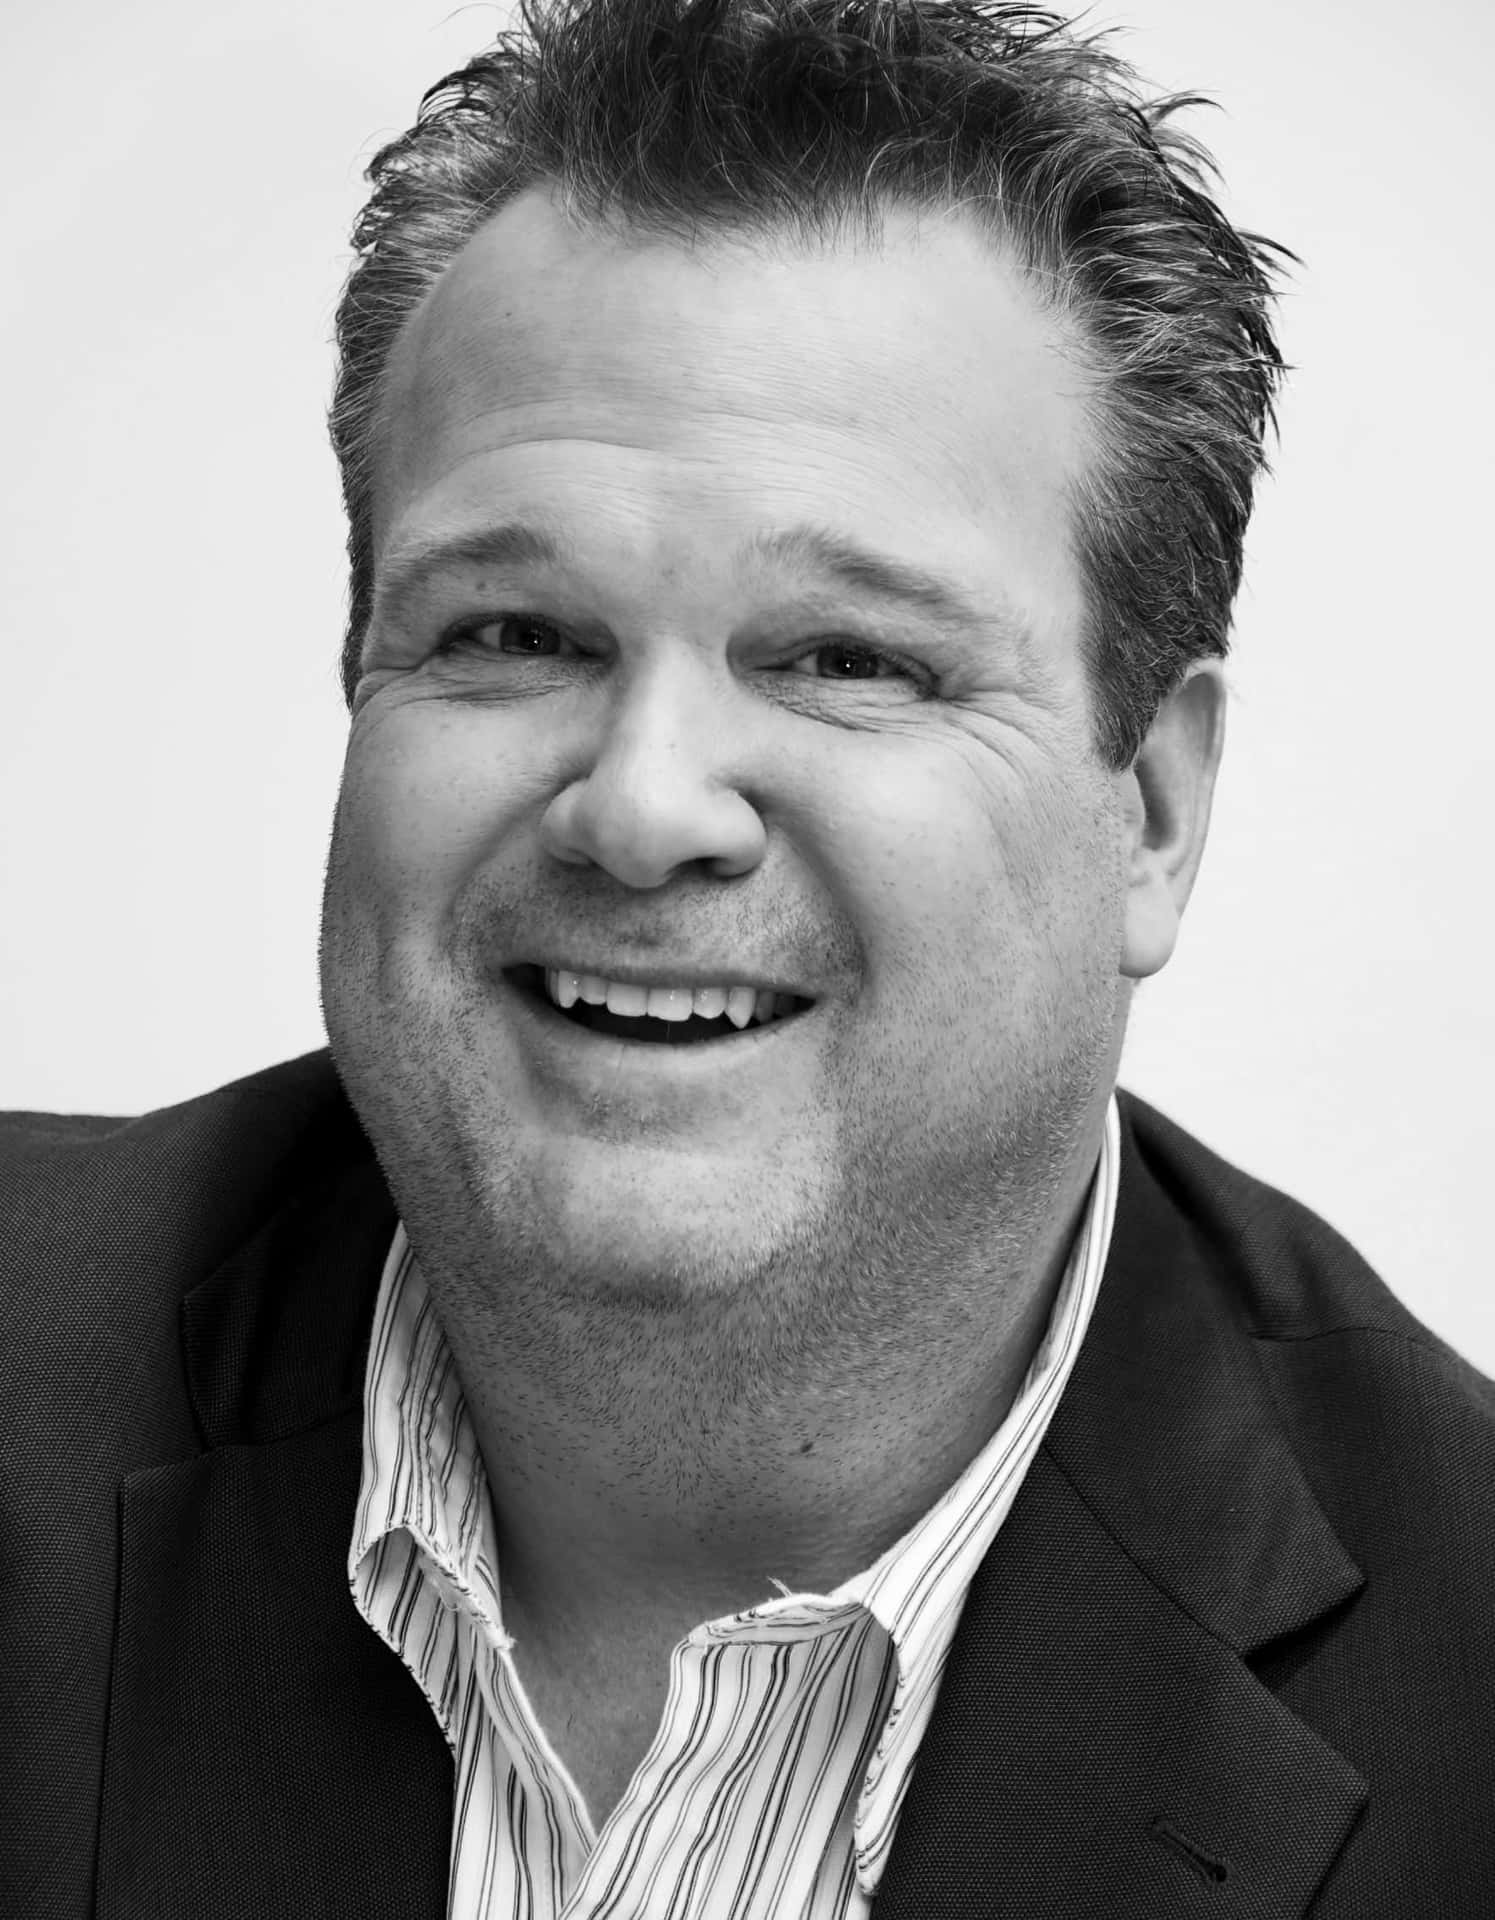 Ericstonestreet Is An American Actor, Best Known For His Role As Cameron Tucker In The Television Series 